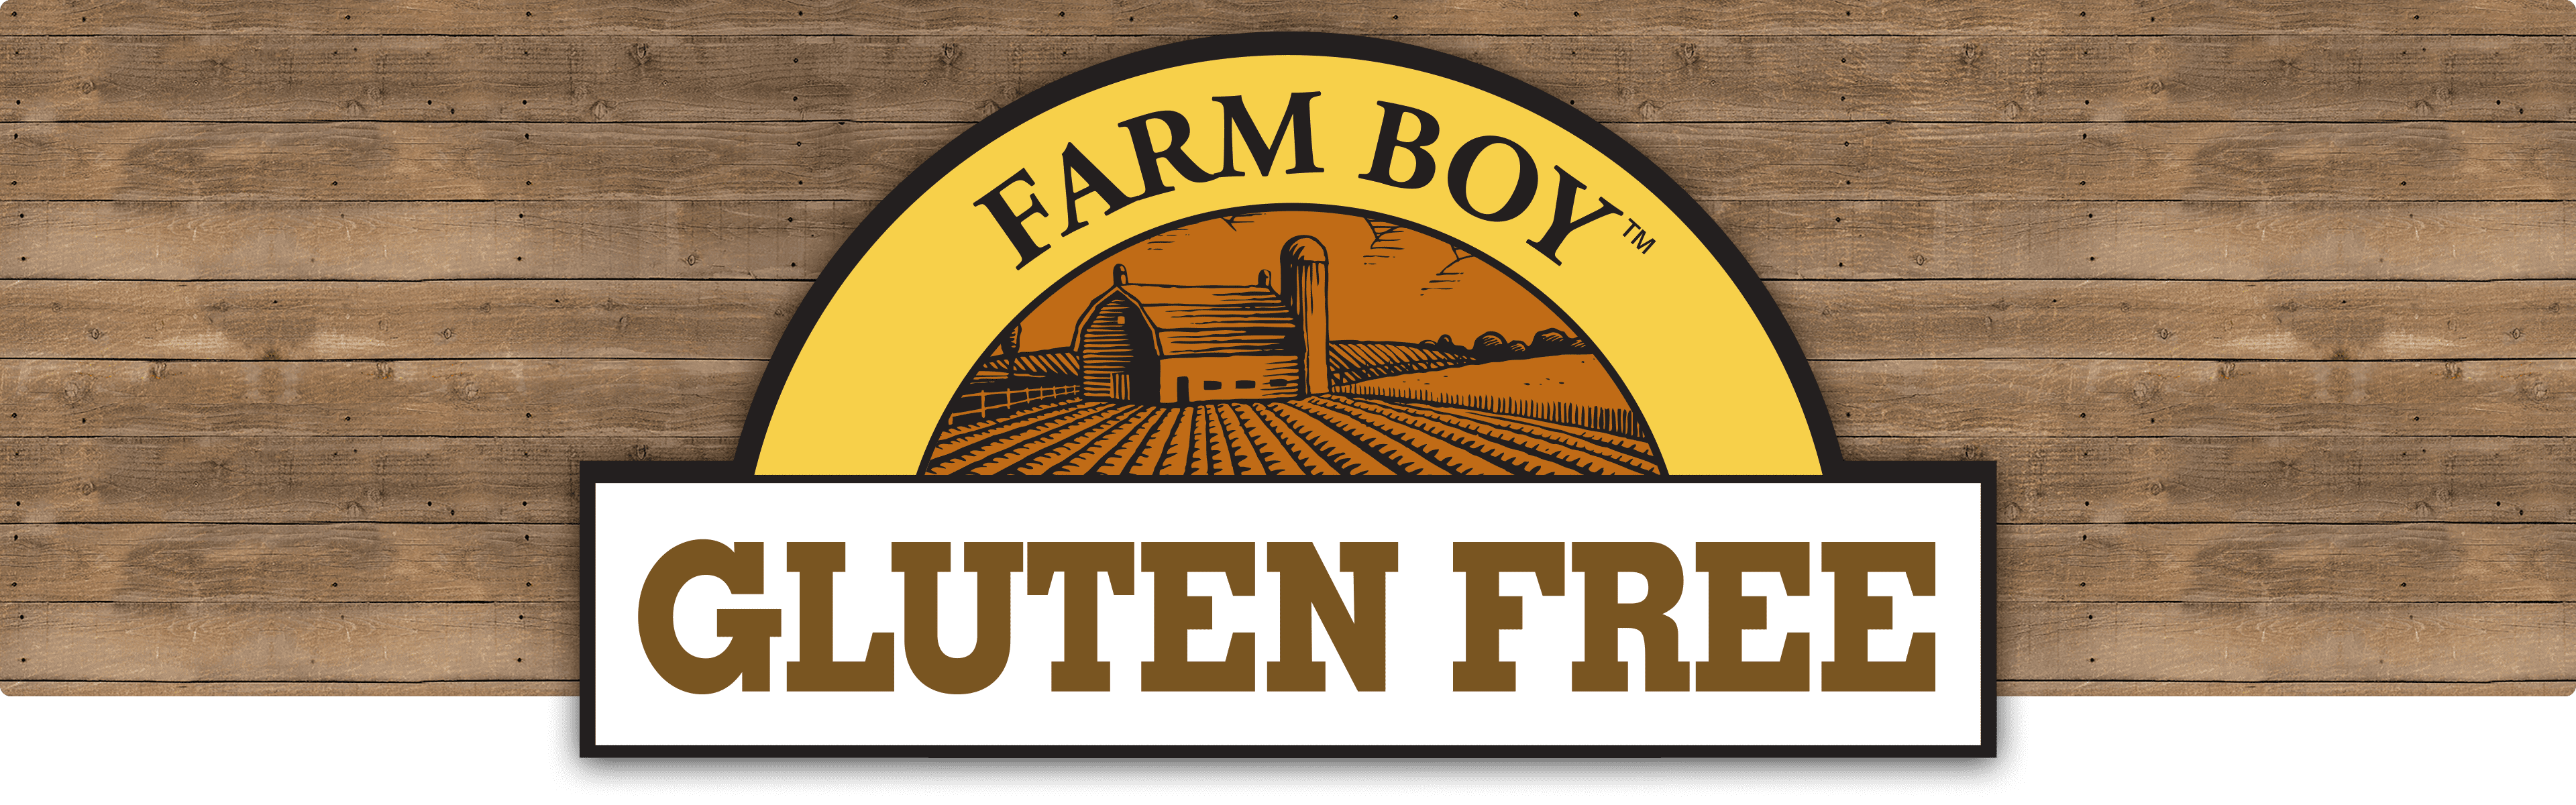 Gluten Free logo by Farm Boy. Look for this logo in-store for various products..